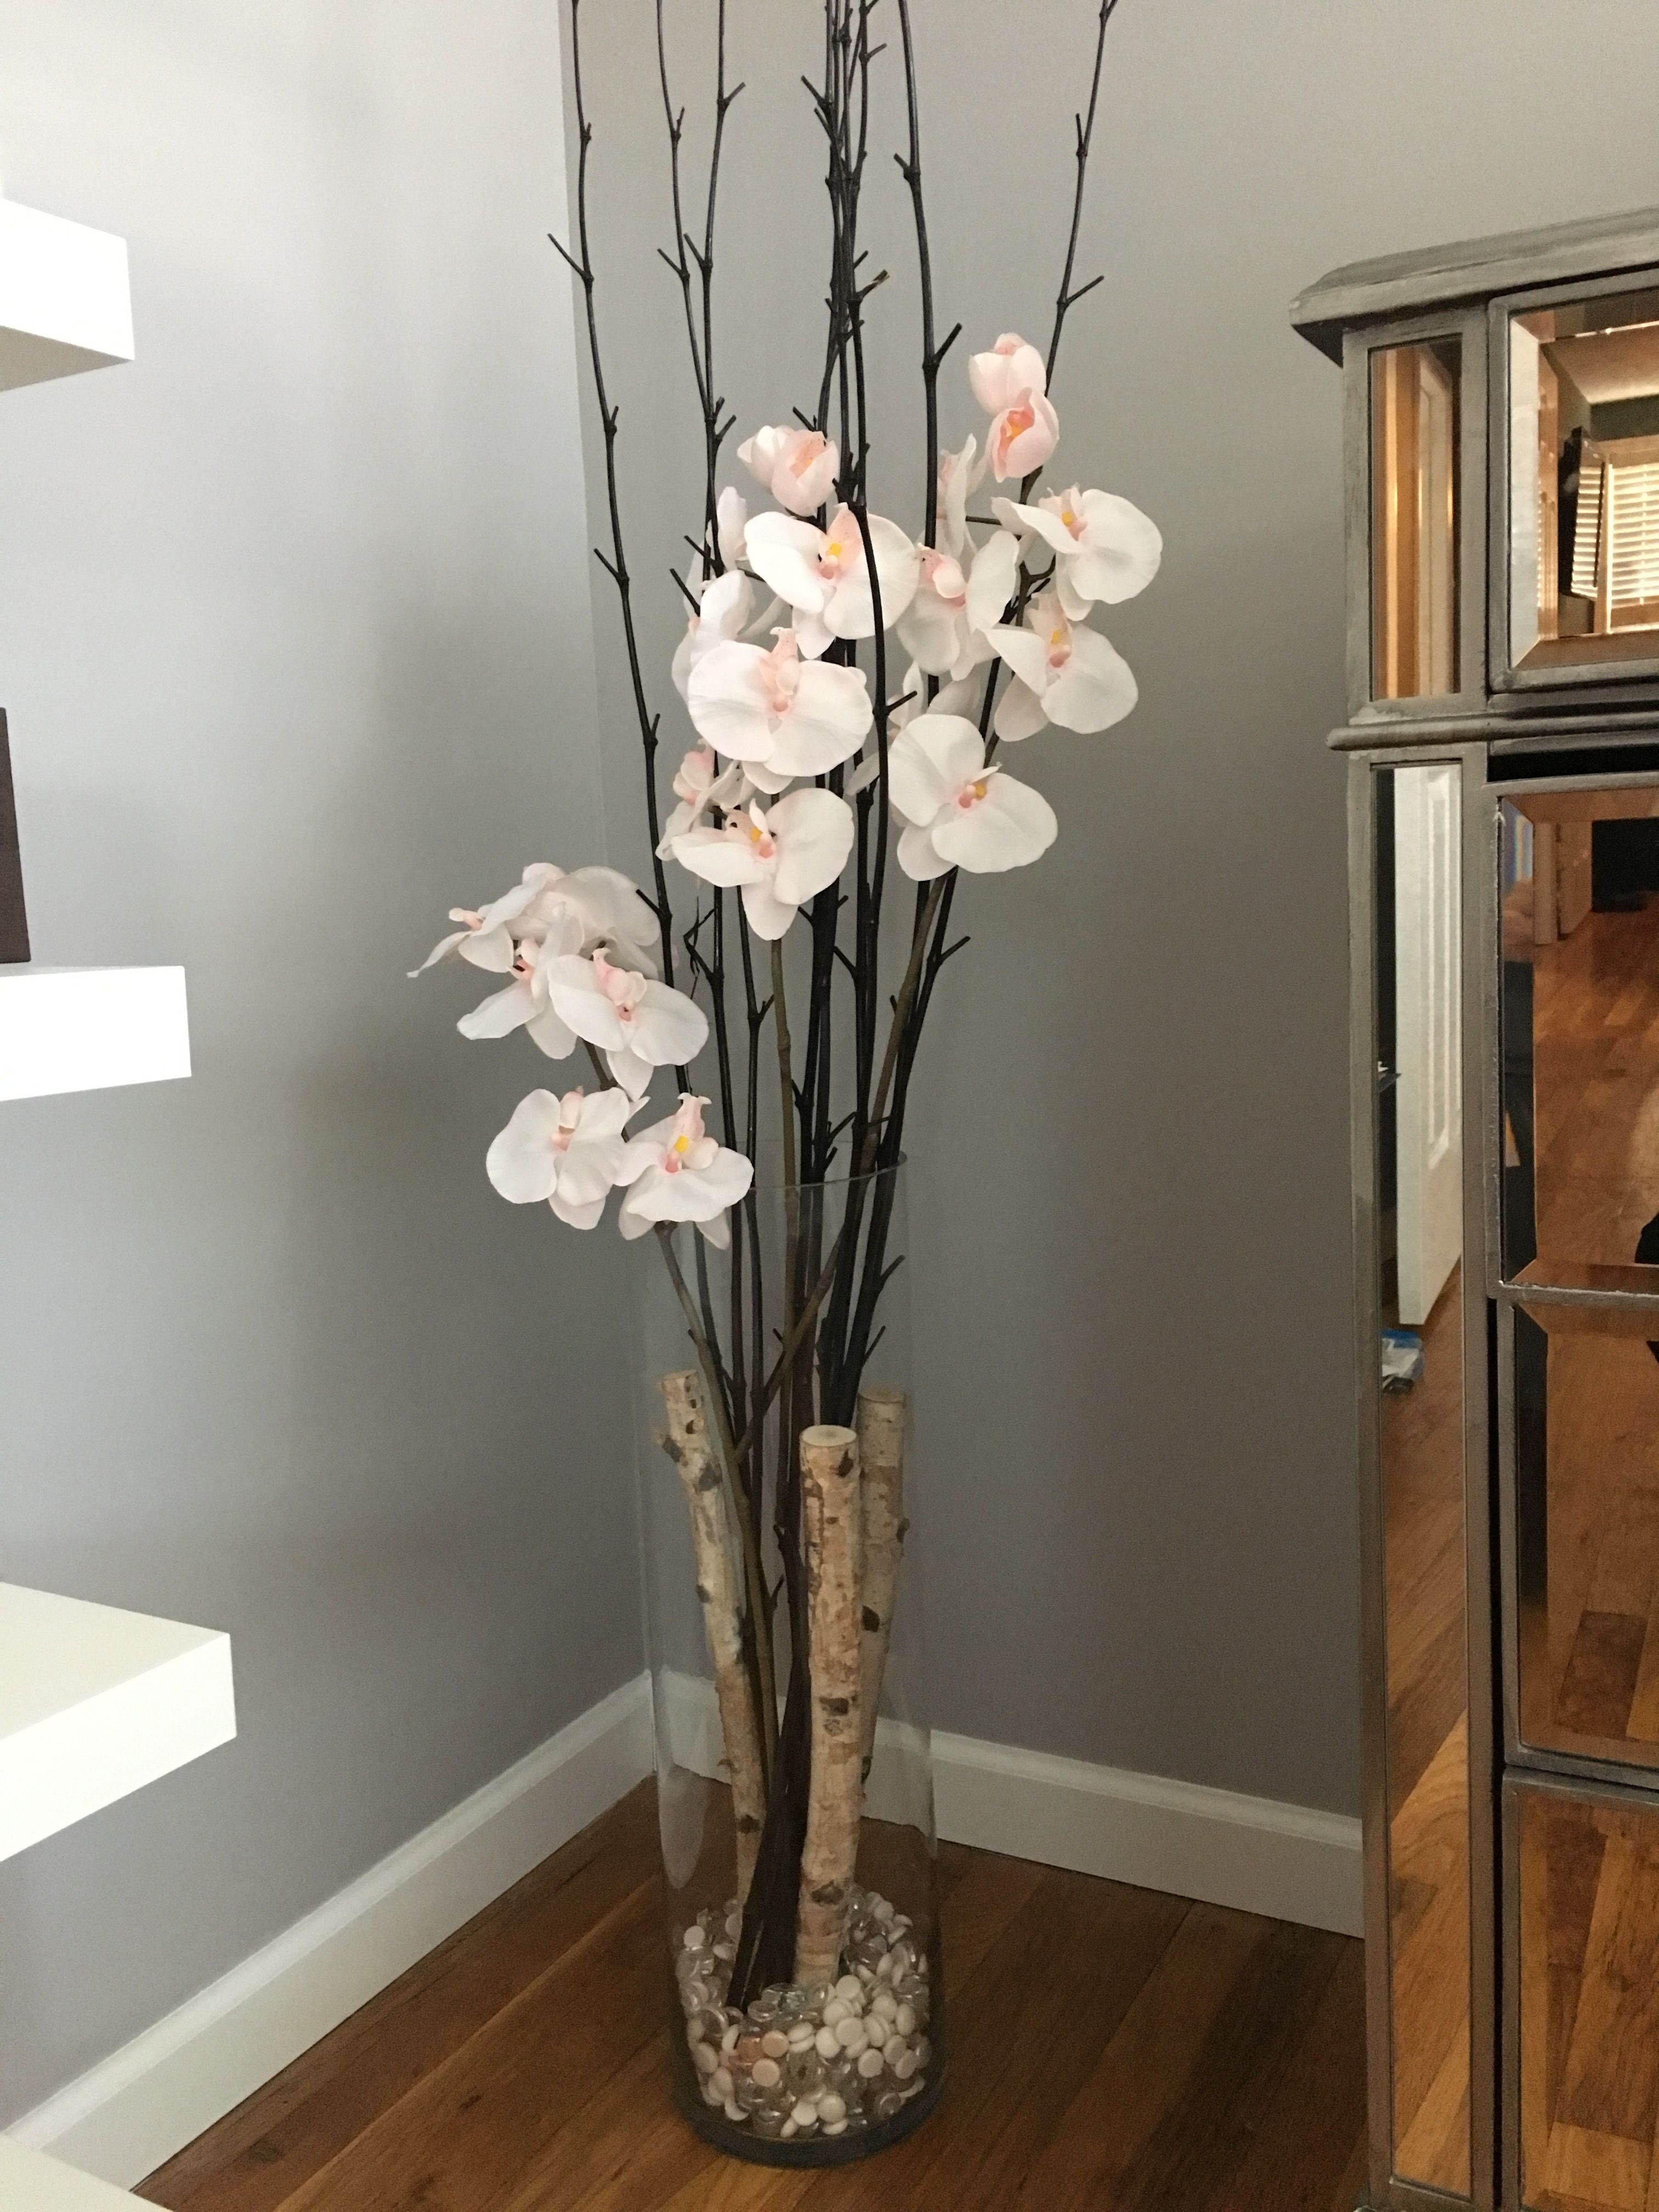 21 Fashionable Giant Glass Vase 2024 free download giant glass vase of decorative branches for weddings awesome tall vase centerpiece ideas with regard to decorative branches for weddings best of floor vase branches orchid flower floor vase 